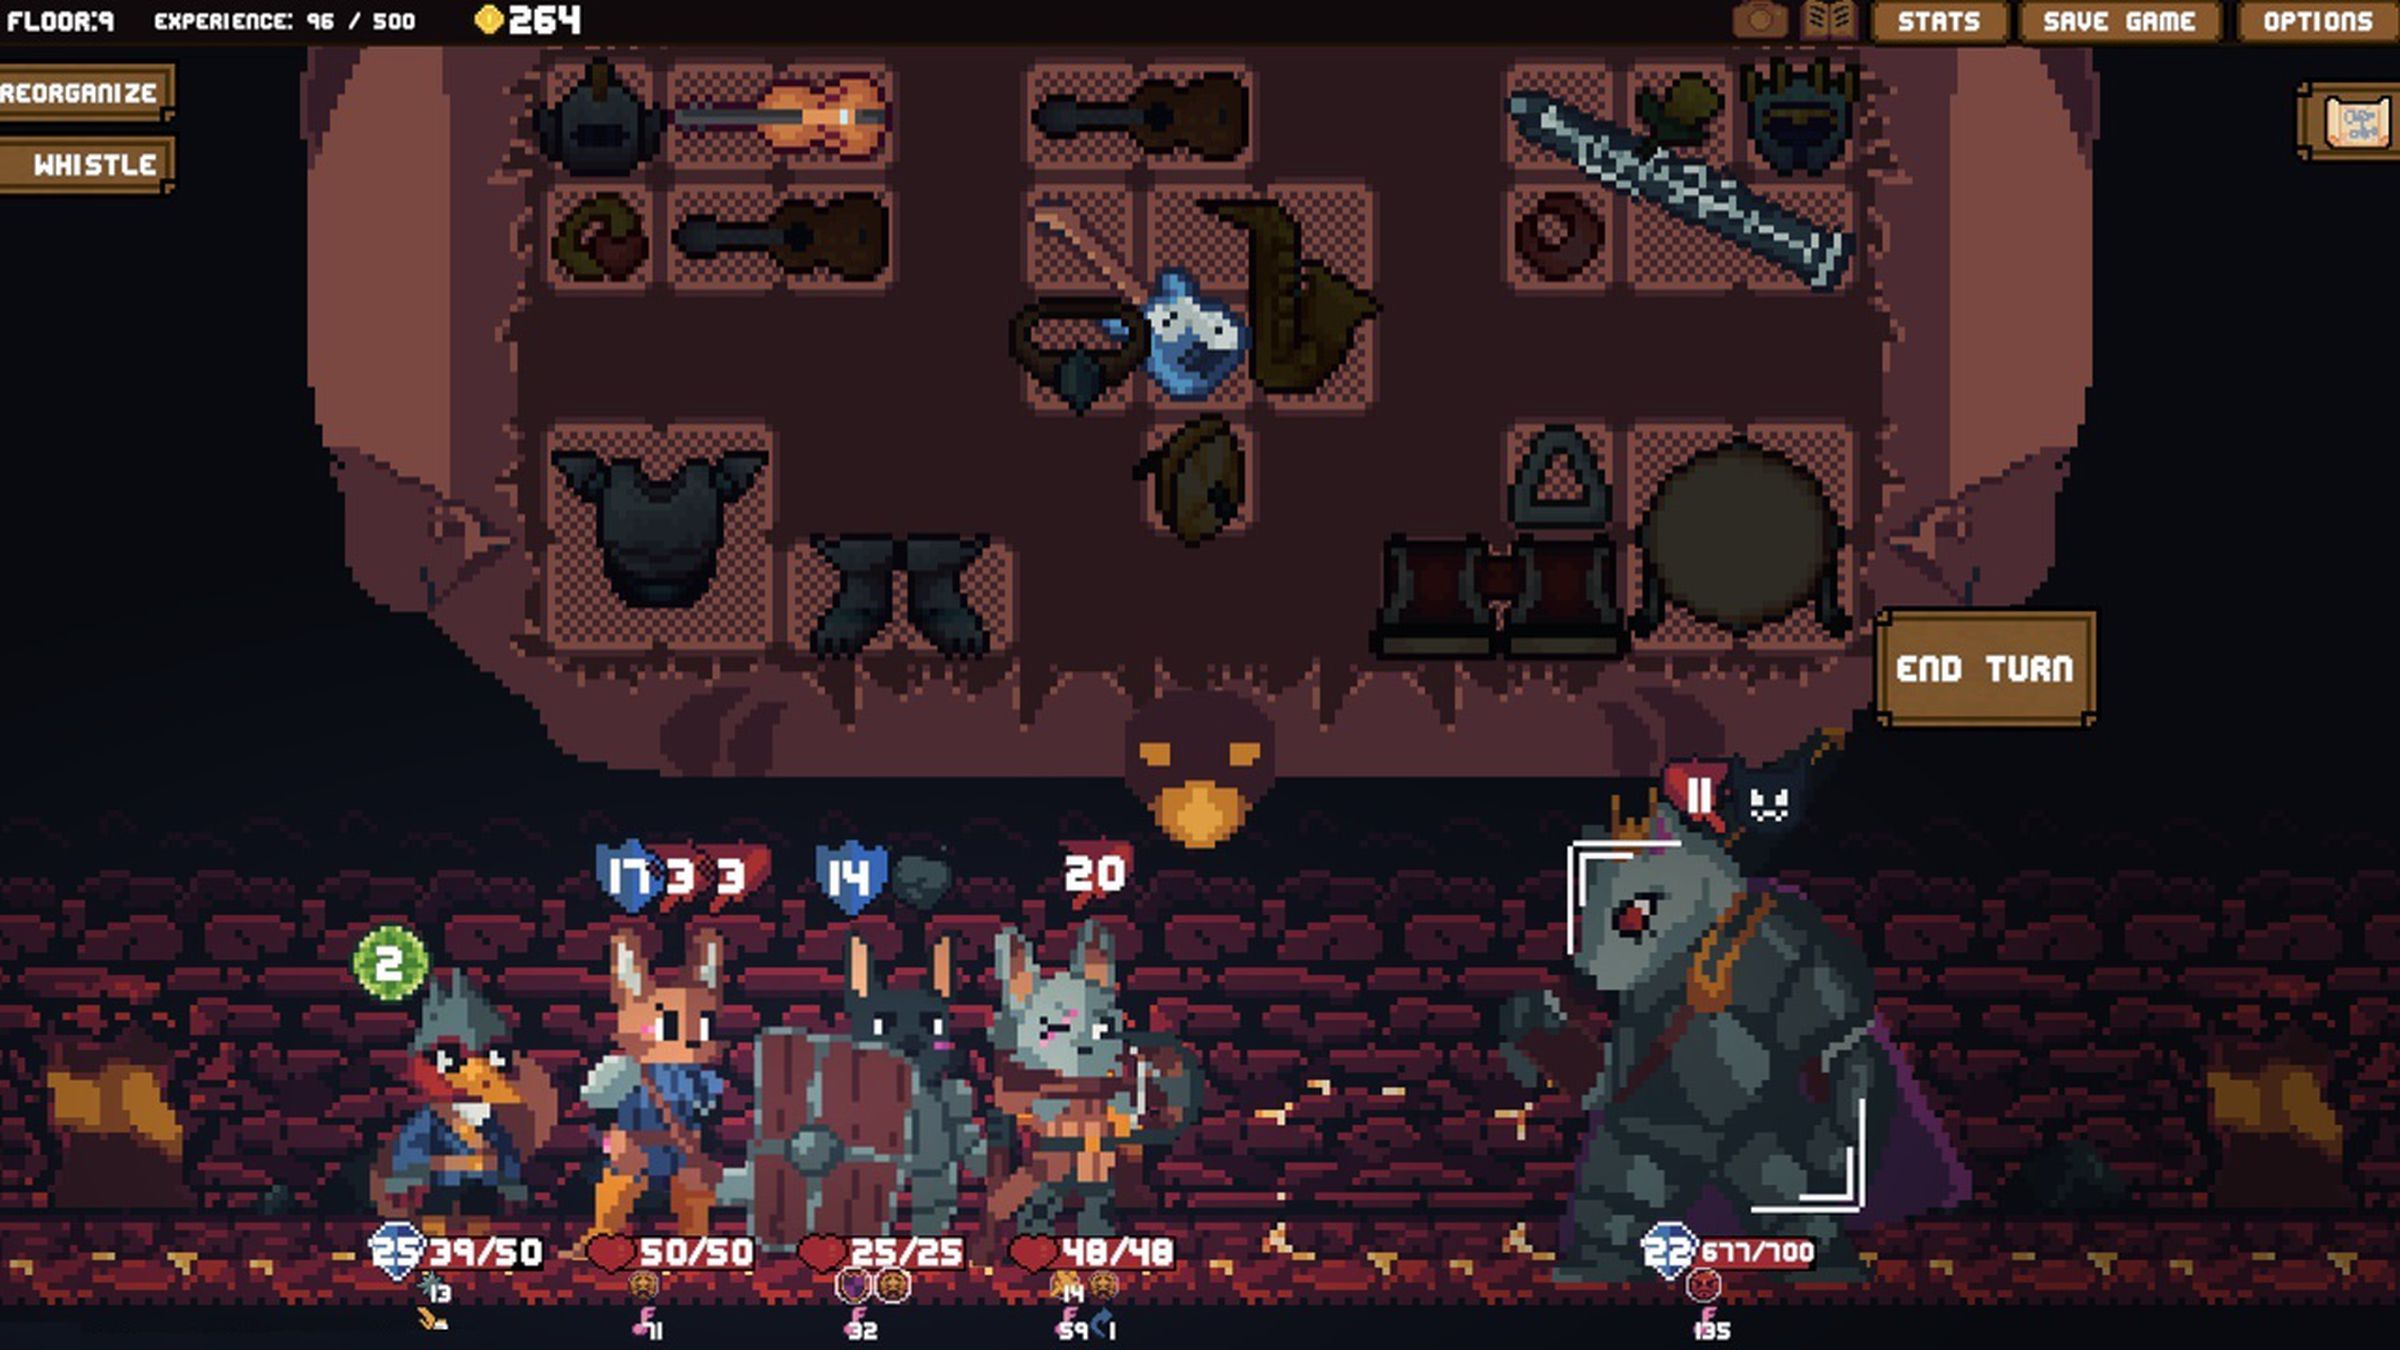 A screenshot from the video game Backpack Hero.